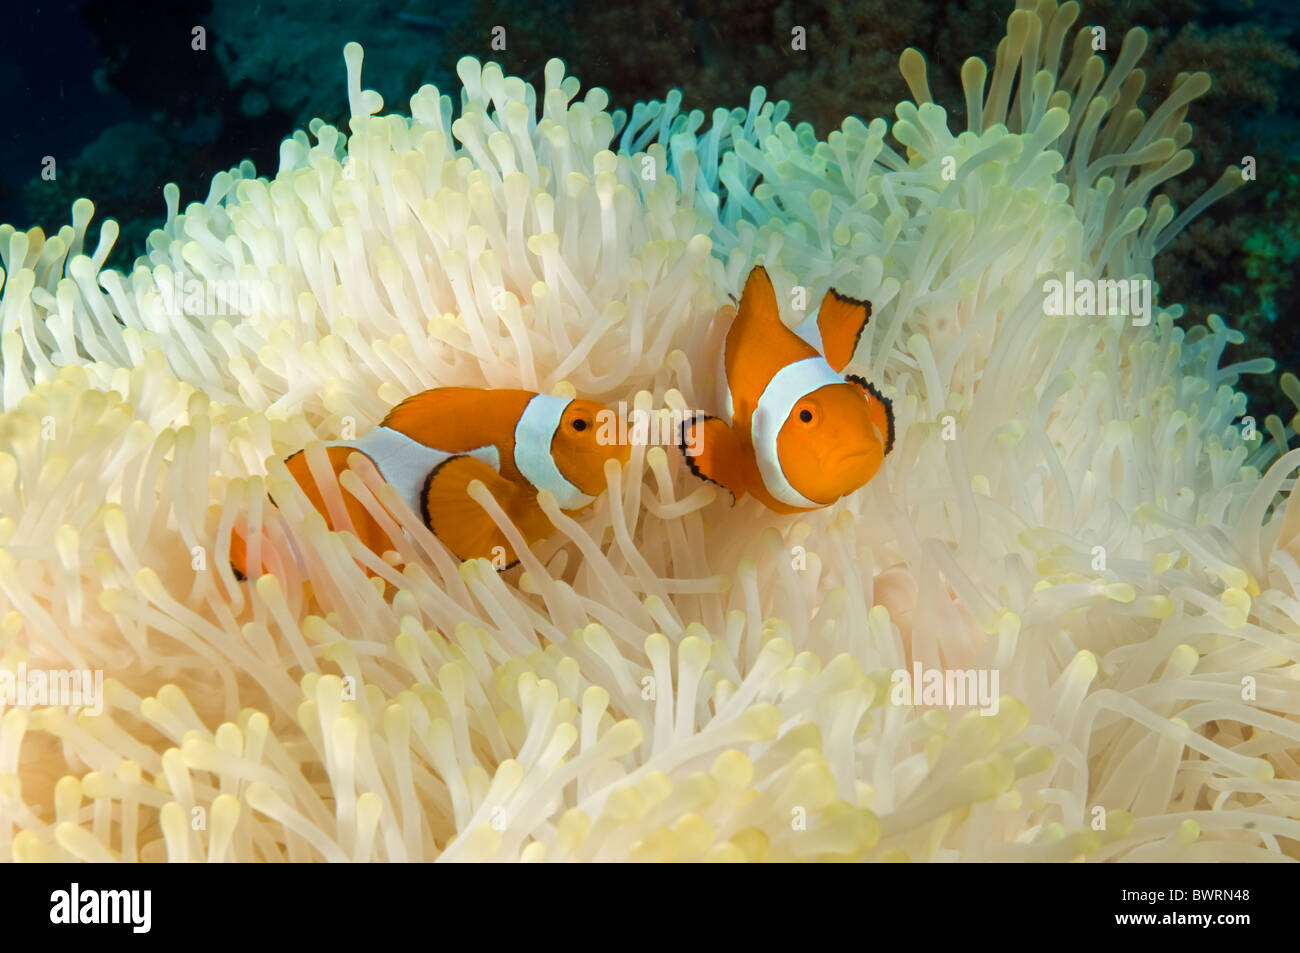 Clownfishes, Amphiprion ocellaris, in a bleached anemone Raja Ampat Indonesia Stock Photo